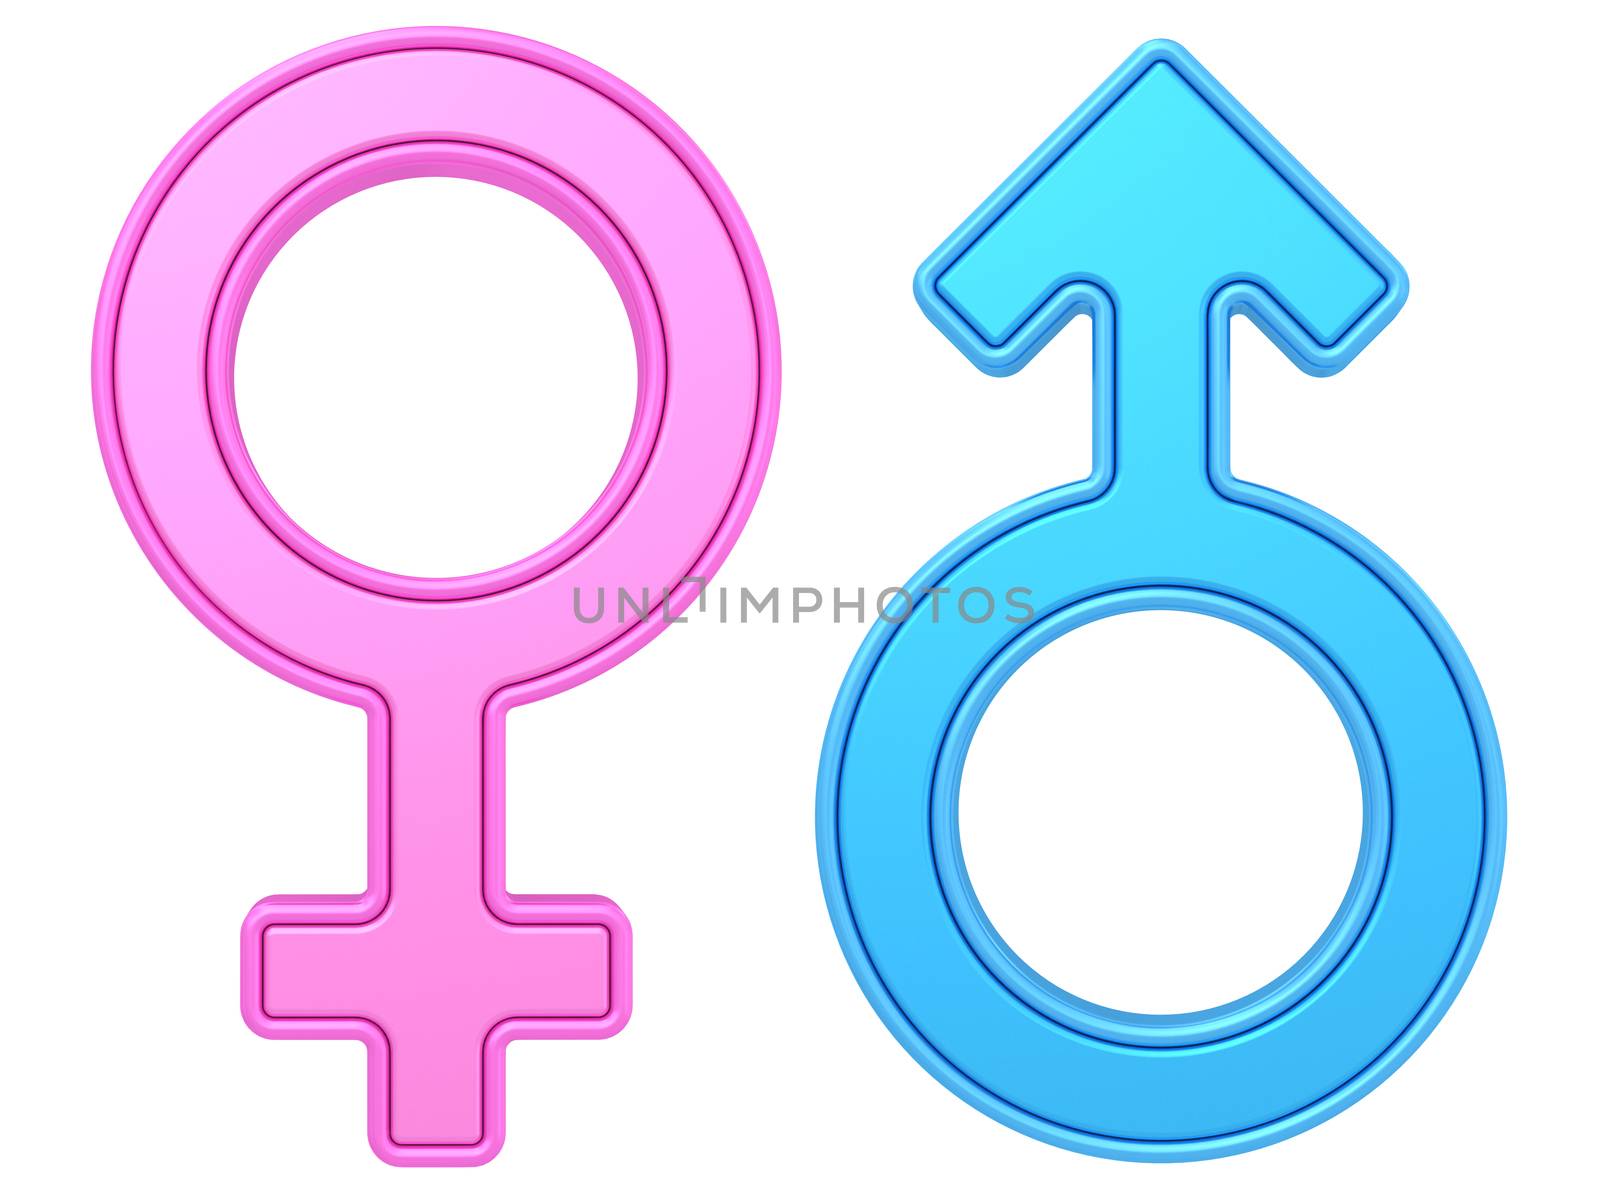 Male and female gender symbols of blue and pink colors on white by oneo